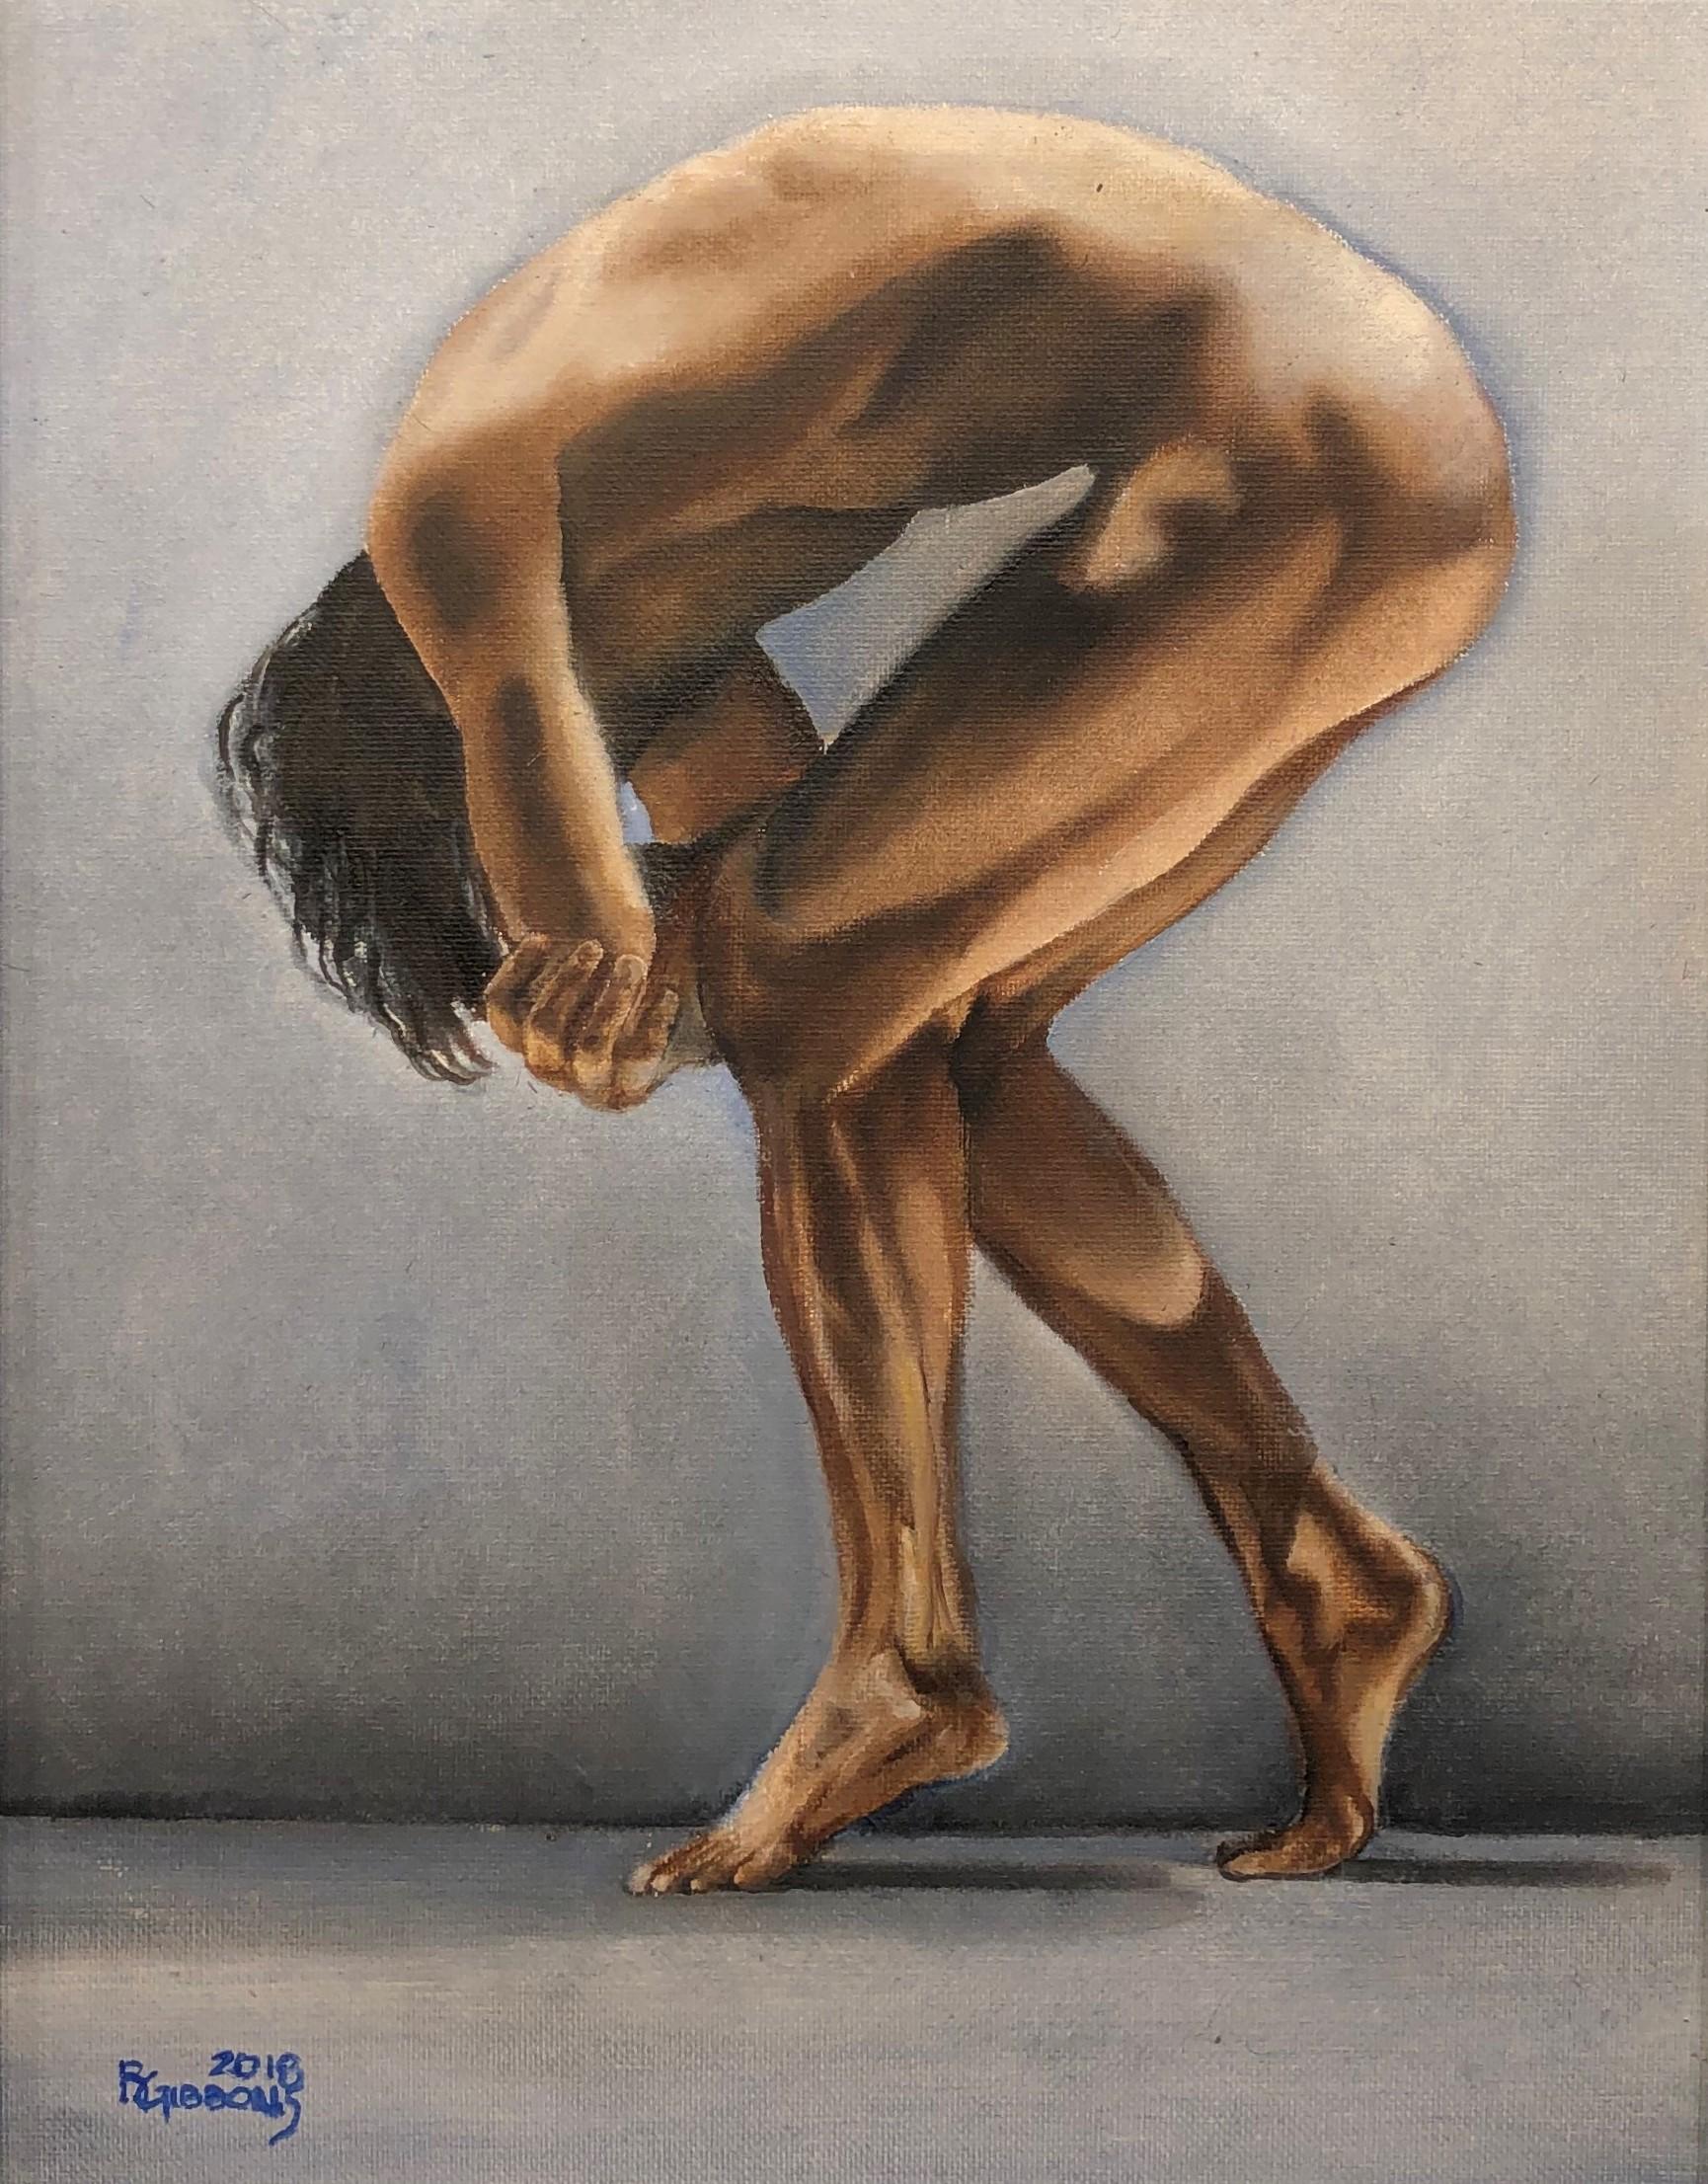 Question II - Bending Male Nude, Pale Blue-Gray, Background, Oil on Canvas - Painting by Richard Gibbons